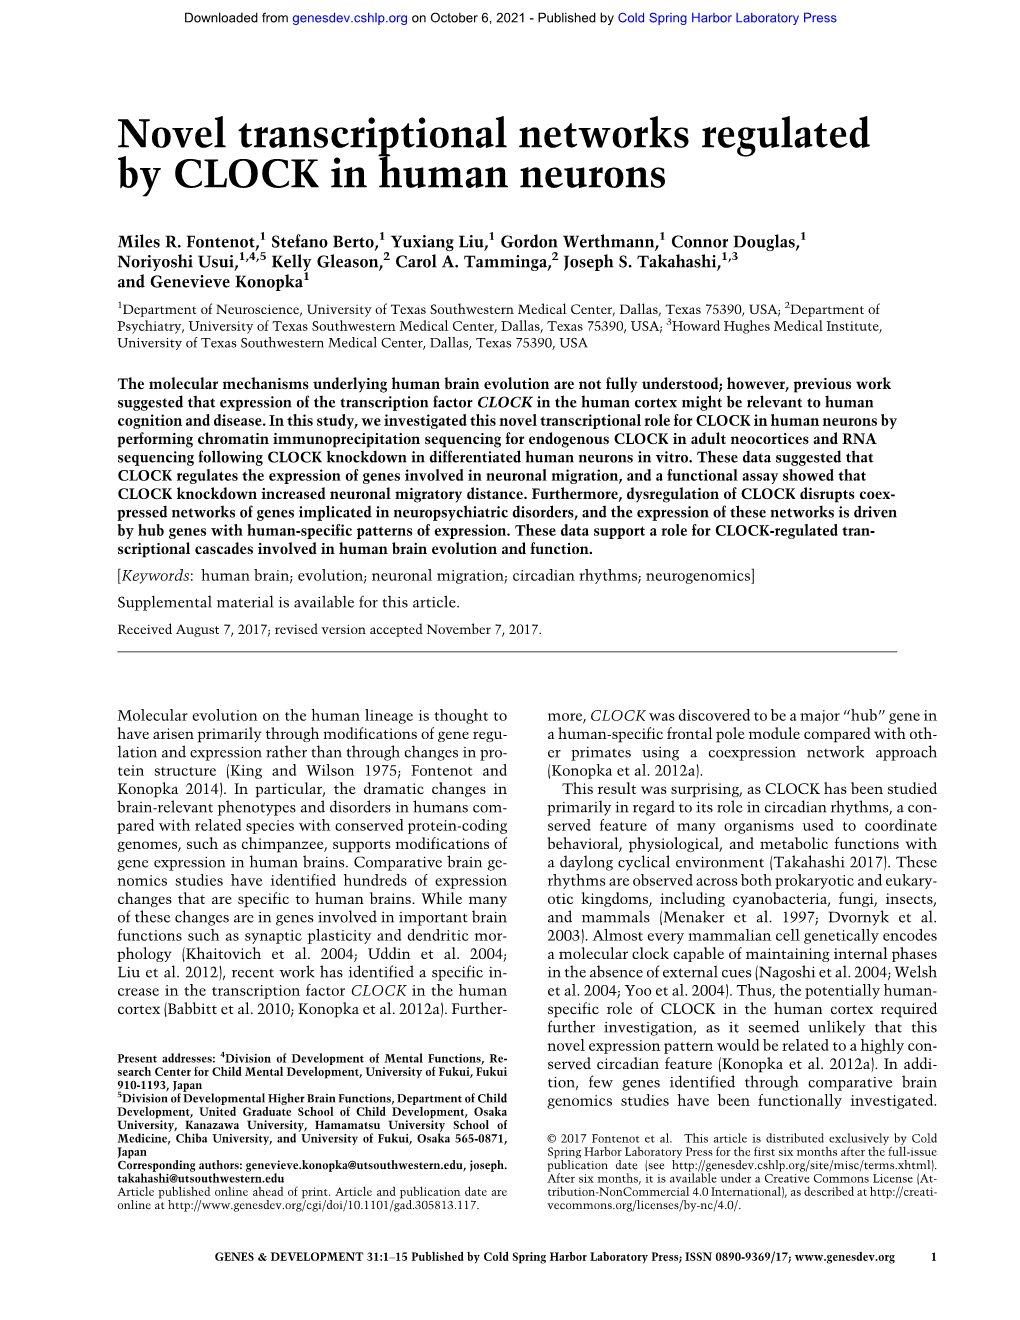 Novel Transcriptional Networks Regulated by CLOCK in Human Neurons